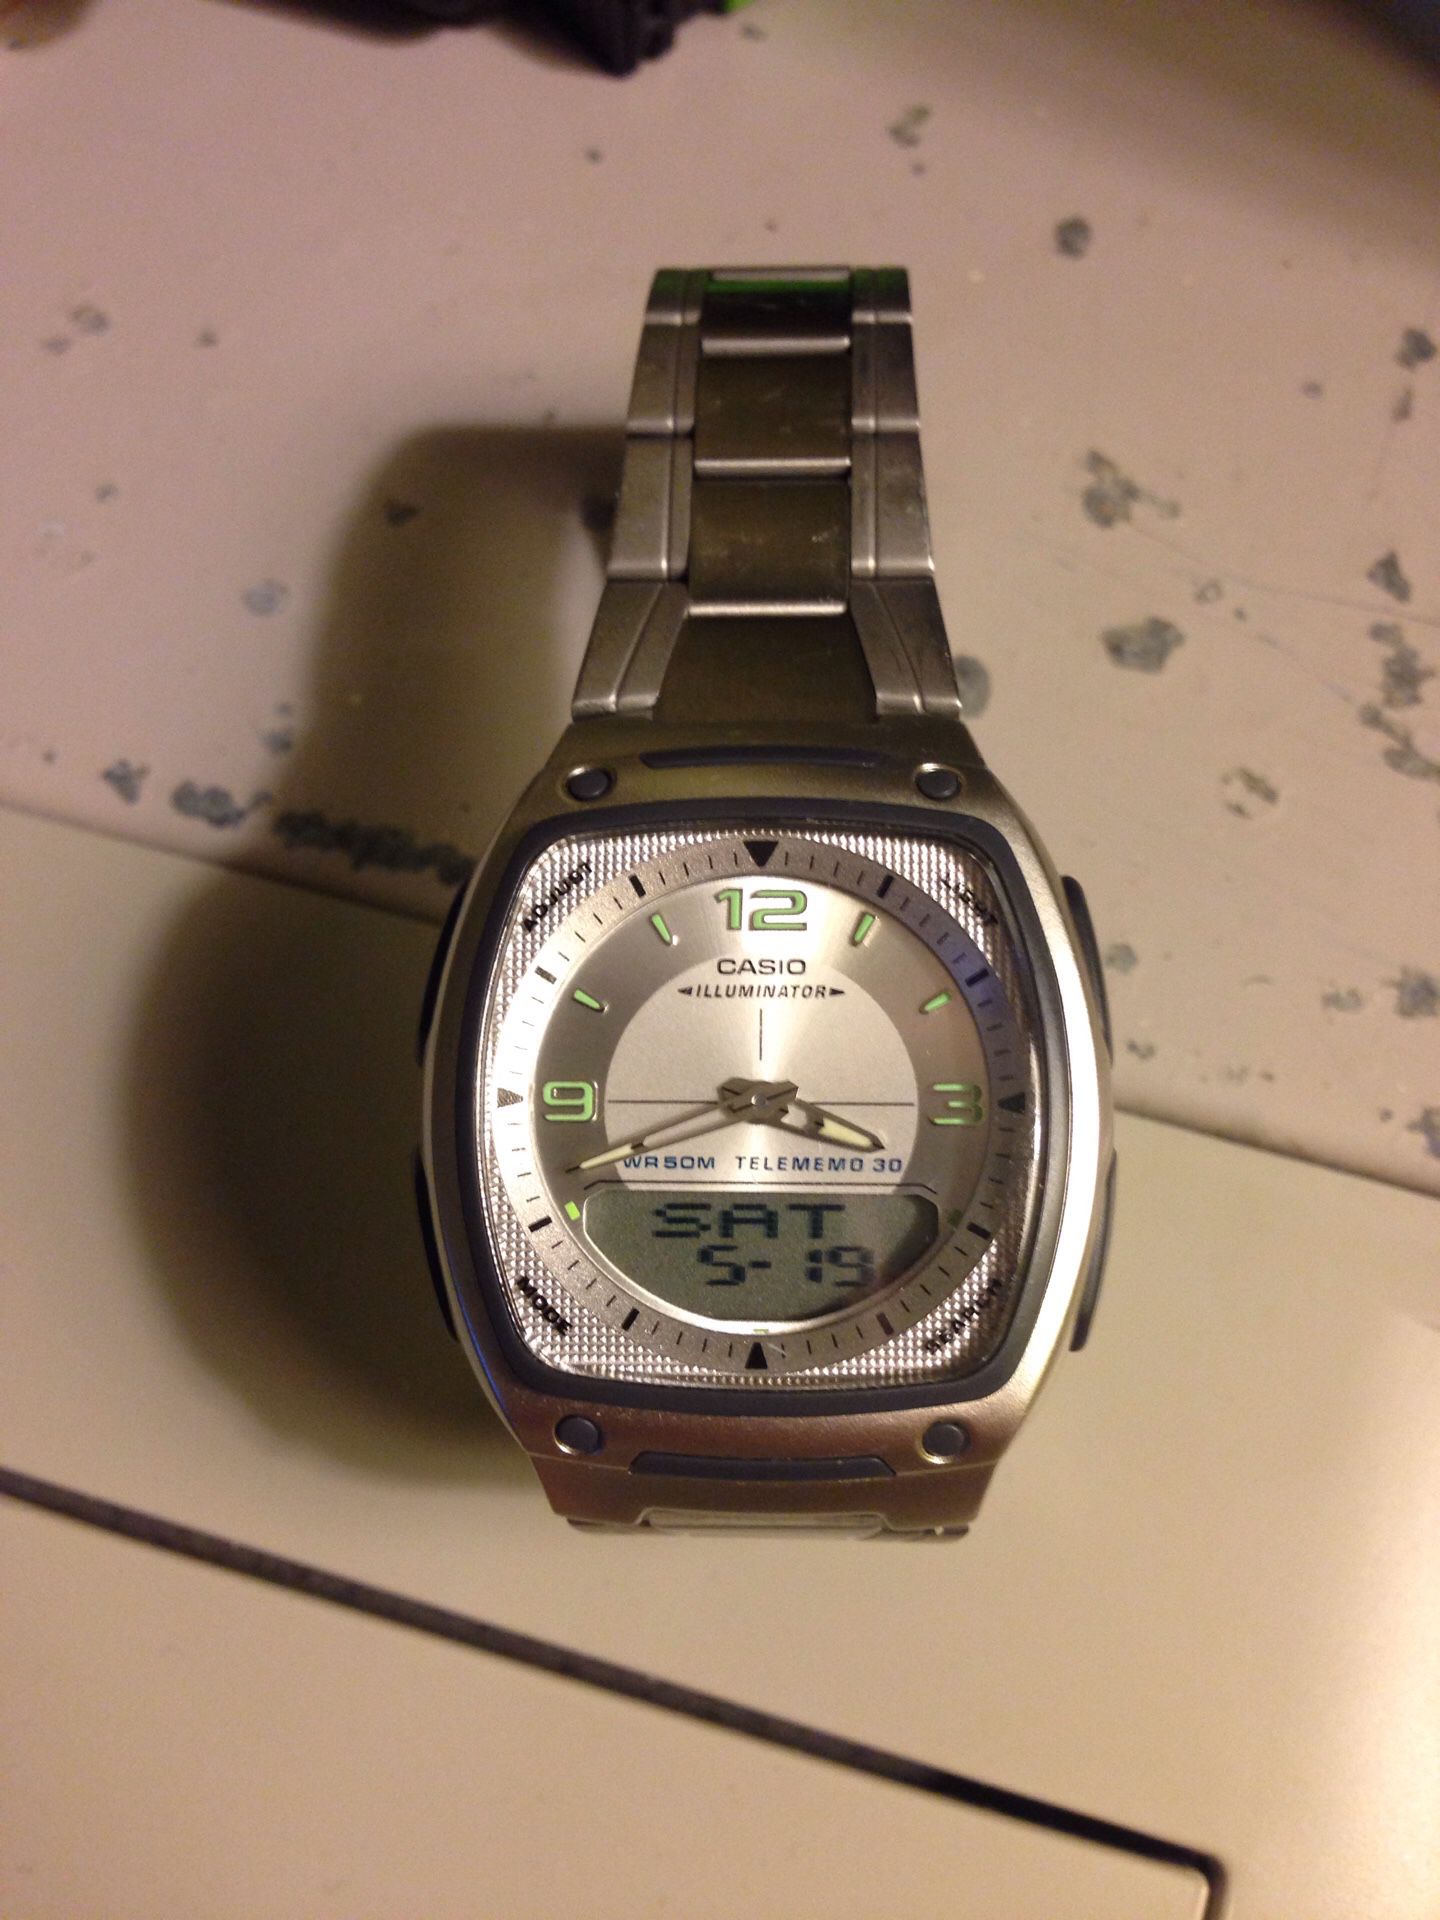 Diagnose Rust skyld Casio Telememo 30 watch for Sale in Tallahassee, FL - OfferUp